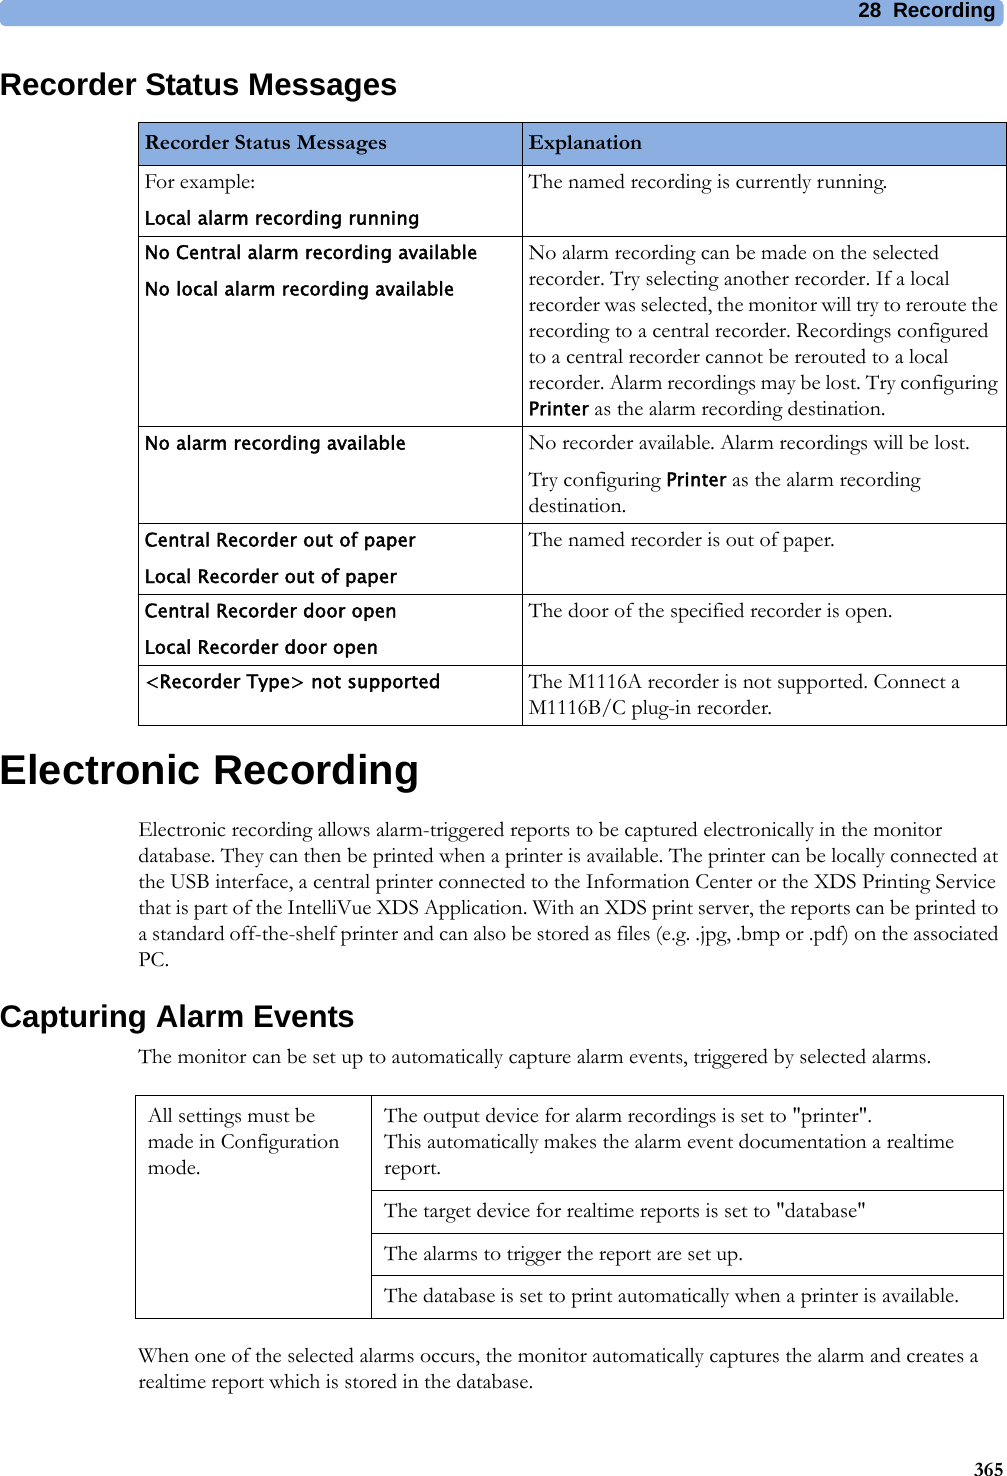 28 Recording365Recorder Status MessagesElectronic RecordingElectronic recording allows alarm-triggered reports to be captured electronically in the monitor database. They can then be printed when a printer is available. The printer can be locally connected at the USB interface, a central printer connected to the Information Center or the XDS Printing Service that is part of the IntelliVue XDS Application. With an XDS print server, the reports can be printed to a standard off-the-shelf printer and can also be stored as files (e.g. .jpg, .bmp or .pdf) on the associated PC.Capturing Alarm EventsThe monitor can be set up to automatically capture alarm events, triggered by selected alarms.When one of the selected alarms occurs, the monitor automatically captures the alarm and creates a realtime report which is stored in the database. Recorder Status Messages ExplanationFor example:Local alarm recording runningThe named recording is currently running.No Central alarm recording availableNo local alarm recording availableNo alarm recording can be made on the selected recorder. Try selecting another recorder. If a local recorder was selected, the monitor will try to reroute the recording to a central recorder. Recordings configured to a central recorder cannot be rerouted to a local recorder. Alarm recordings may be lost. Try configuring Printer as the alarm recording destination.No alarm recording available No recorder available. Alarm recordings will be lost.Try configuring Printer as the alarm recording destination.Central Recorder out of paperLocal Recorder out of paperThe named recorder is out of paper.Central Recorder door openLocal Recorder door openThe door of the specified recorder is open.&lt;Recorder Type&gt; not supported The M1116A recorder is not supported. Connect a M1116B/C plug-in recorder.All settings must be made in Configuration mode.The output device for alarm recordings is set to &quot;printer&quot;.This automatically makes the alarm event documentation a realtime report.The target device for realtime reports is set to &quot;database&quot;The alarms to trigger the report are set up.The database is set to print automatically when a printer is available.